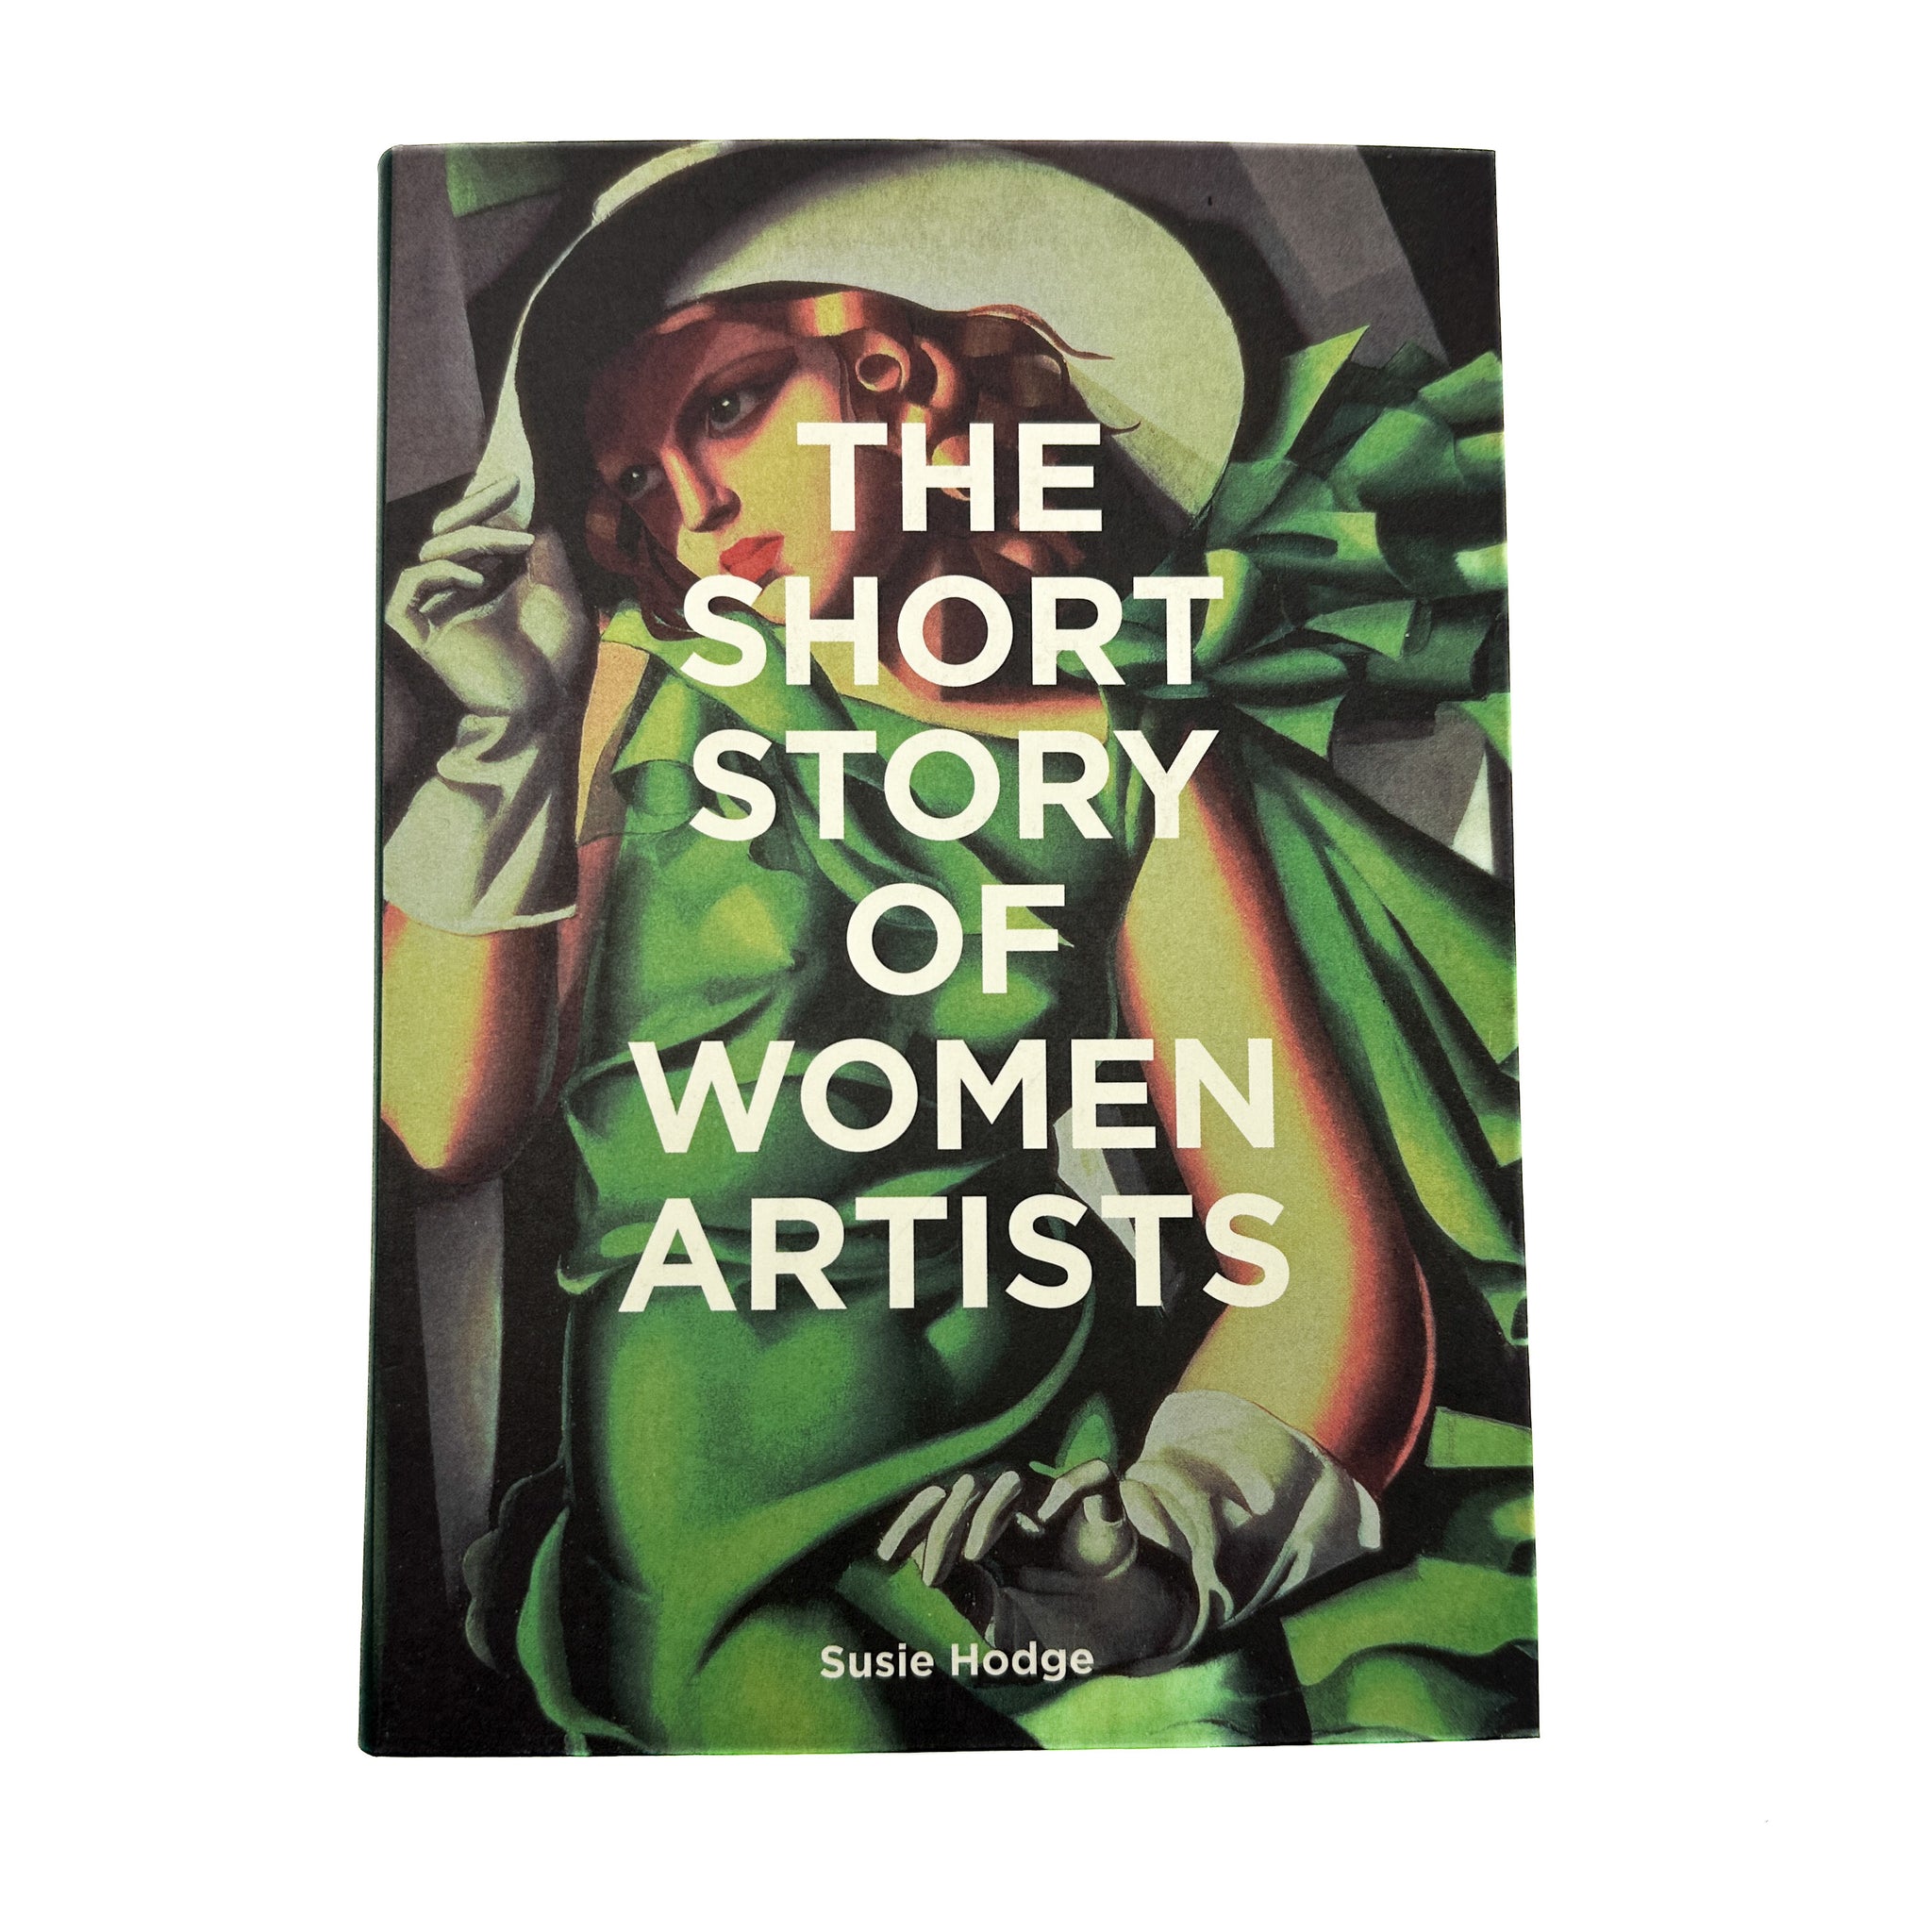 The Short Story of Women Artists by Susie Hodge